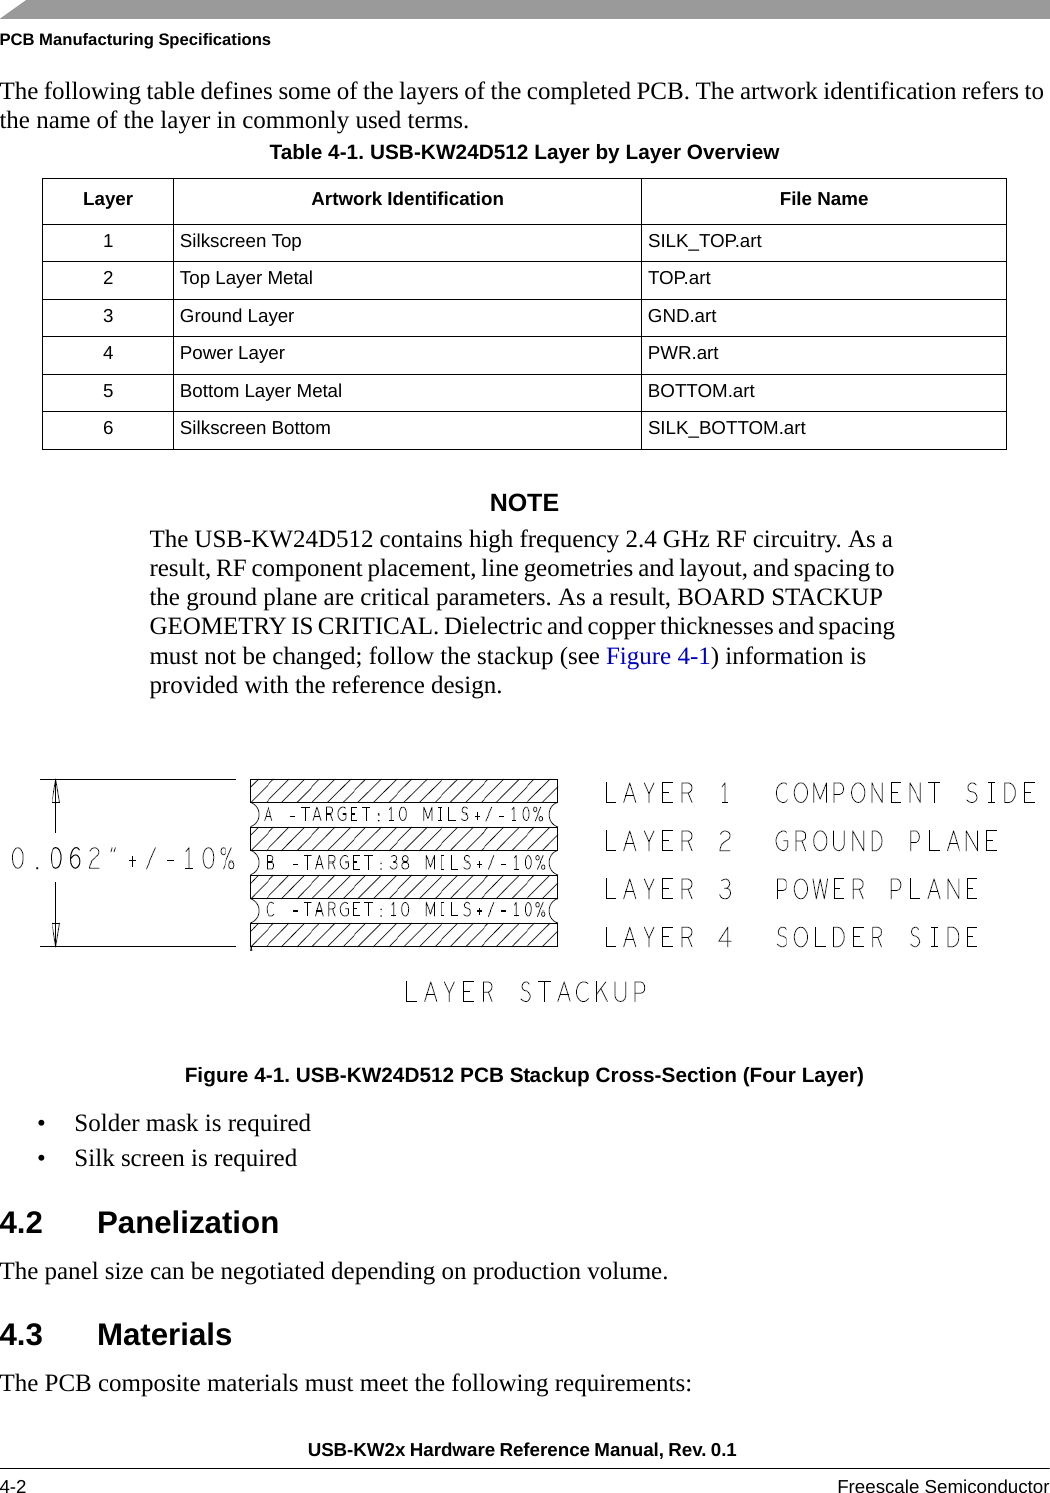 PCB Manufacturing SpecificationsUSB-KW2x Hardware Reference Manual, Rev. 0.1 4-2 Freescale SemiconductorThe following table defines some of the layers of the completed PCB. The artwork identification refers to the name of the layer in commonly used terms.NOTEThe USB-KW24D512 contains high frequency 2.4 GHz RF circuitry. As a result, RF component placement, line geometries and layout, and spacing to the ground plane are critical parameters. As a result, BOARD STACKUP GEOMETRY IS CRITICAL. Dielectric and copper thicknesses and spacing must not be changed; follow the stackup (see Figure 4-1) information is provided with the reference design.Figure 4-1. USB-KW24D512 PCB Stackup Cross-Section (Four Layer)• Solder mask is required• Silk screen is required4.2 PanelizationThe panel size can be negotiated depending on production volume.4.3 MaterialsThe PCB composite materials must meet the following requirements:Table 4-1. USB-KW24D512 Layer by Layer OverviewLayer Artwork Identification  File Name1 Silkscreen Top  SILK_TOP.art2 Top Layer Metal TOP.art3 Ground Layer GND.art4 Power Layer PWR.art5 Bottom Layer Metal BOTTOM.art6 Silkscreen Bottom SILK_BOTTOM.art